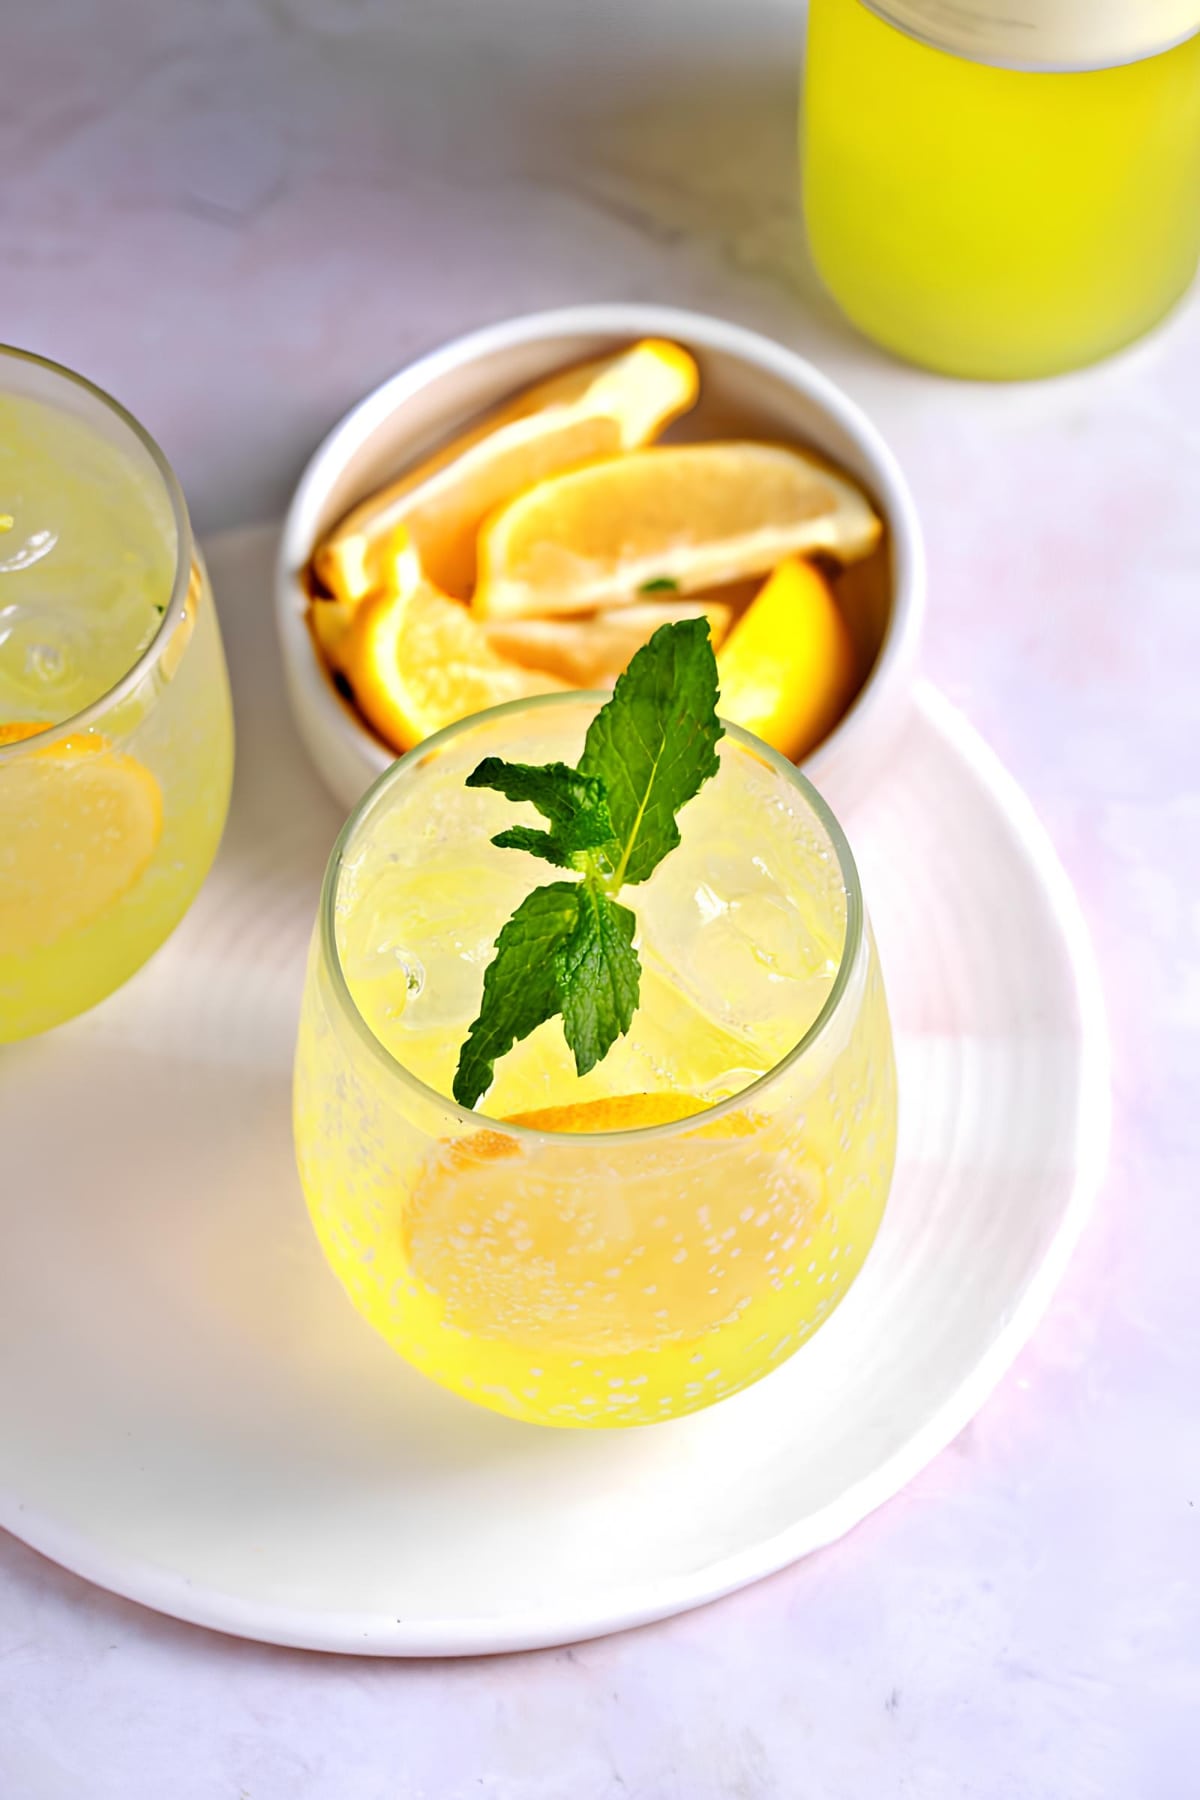 Top view of Limoncello spritz cocktail on glasses, garnished with lemon slices and fresh mint leaves. 